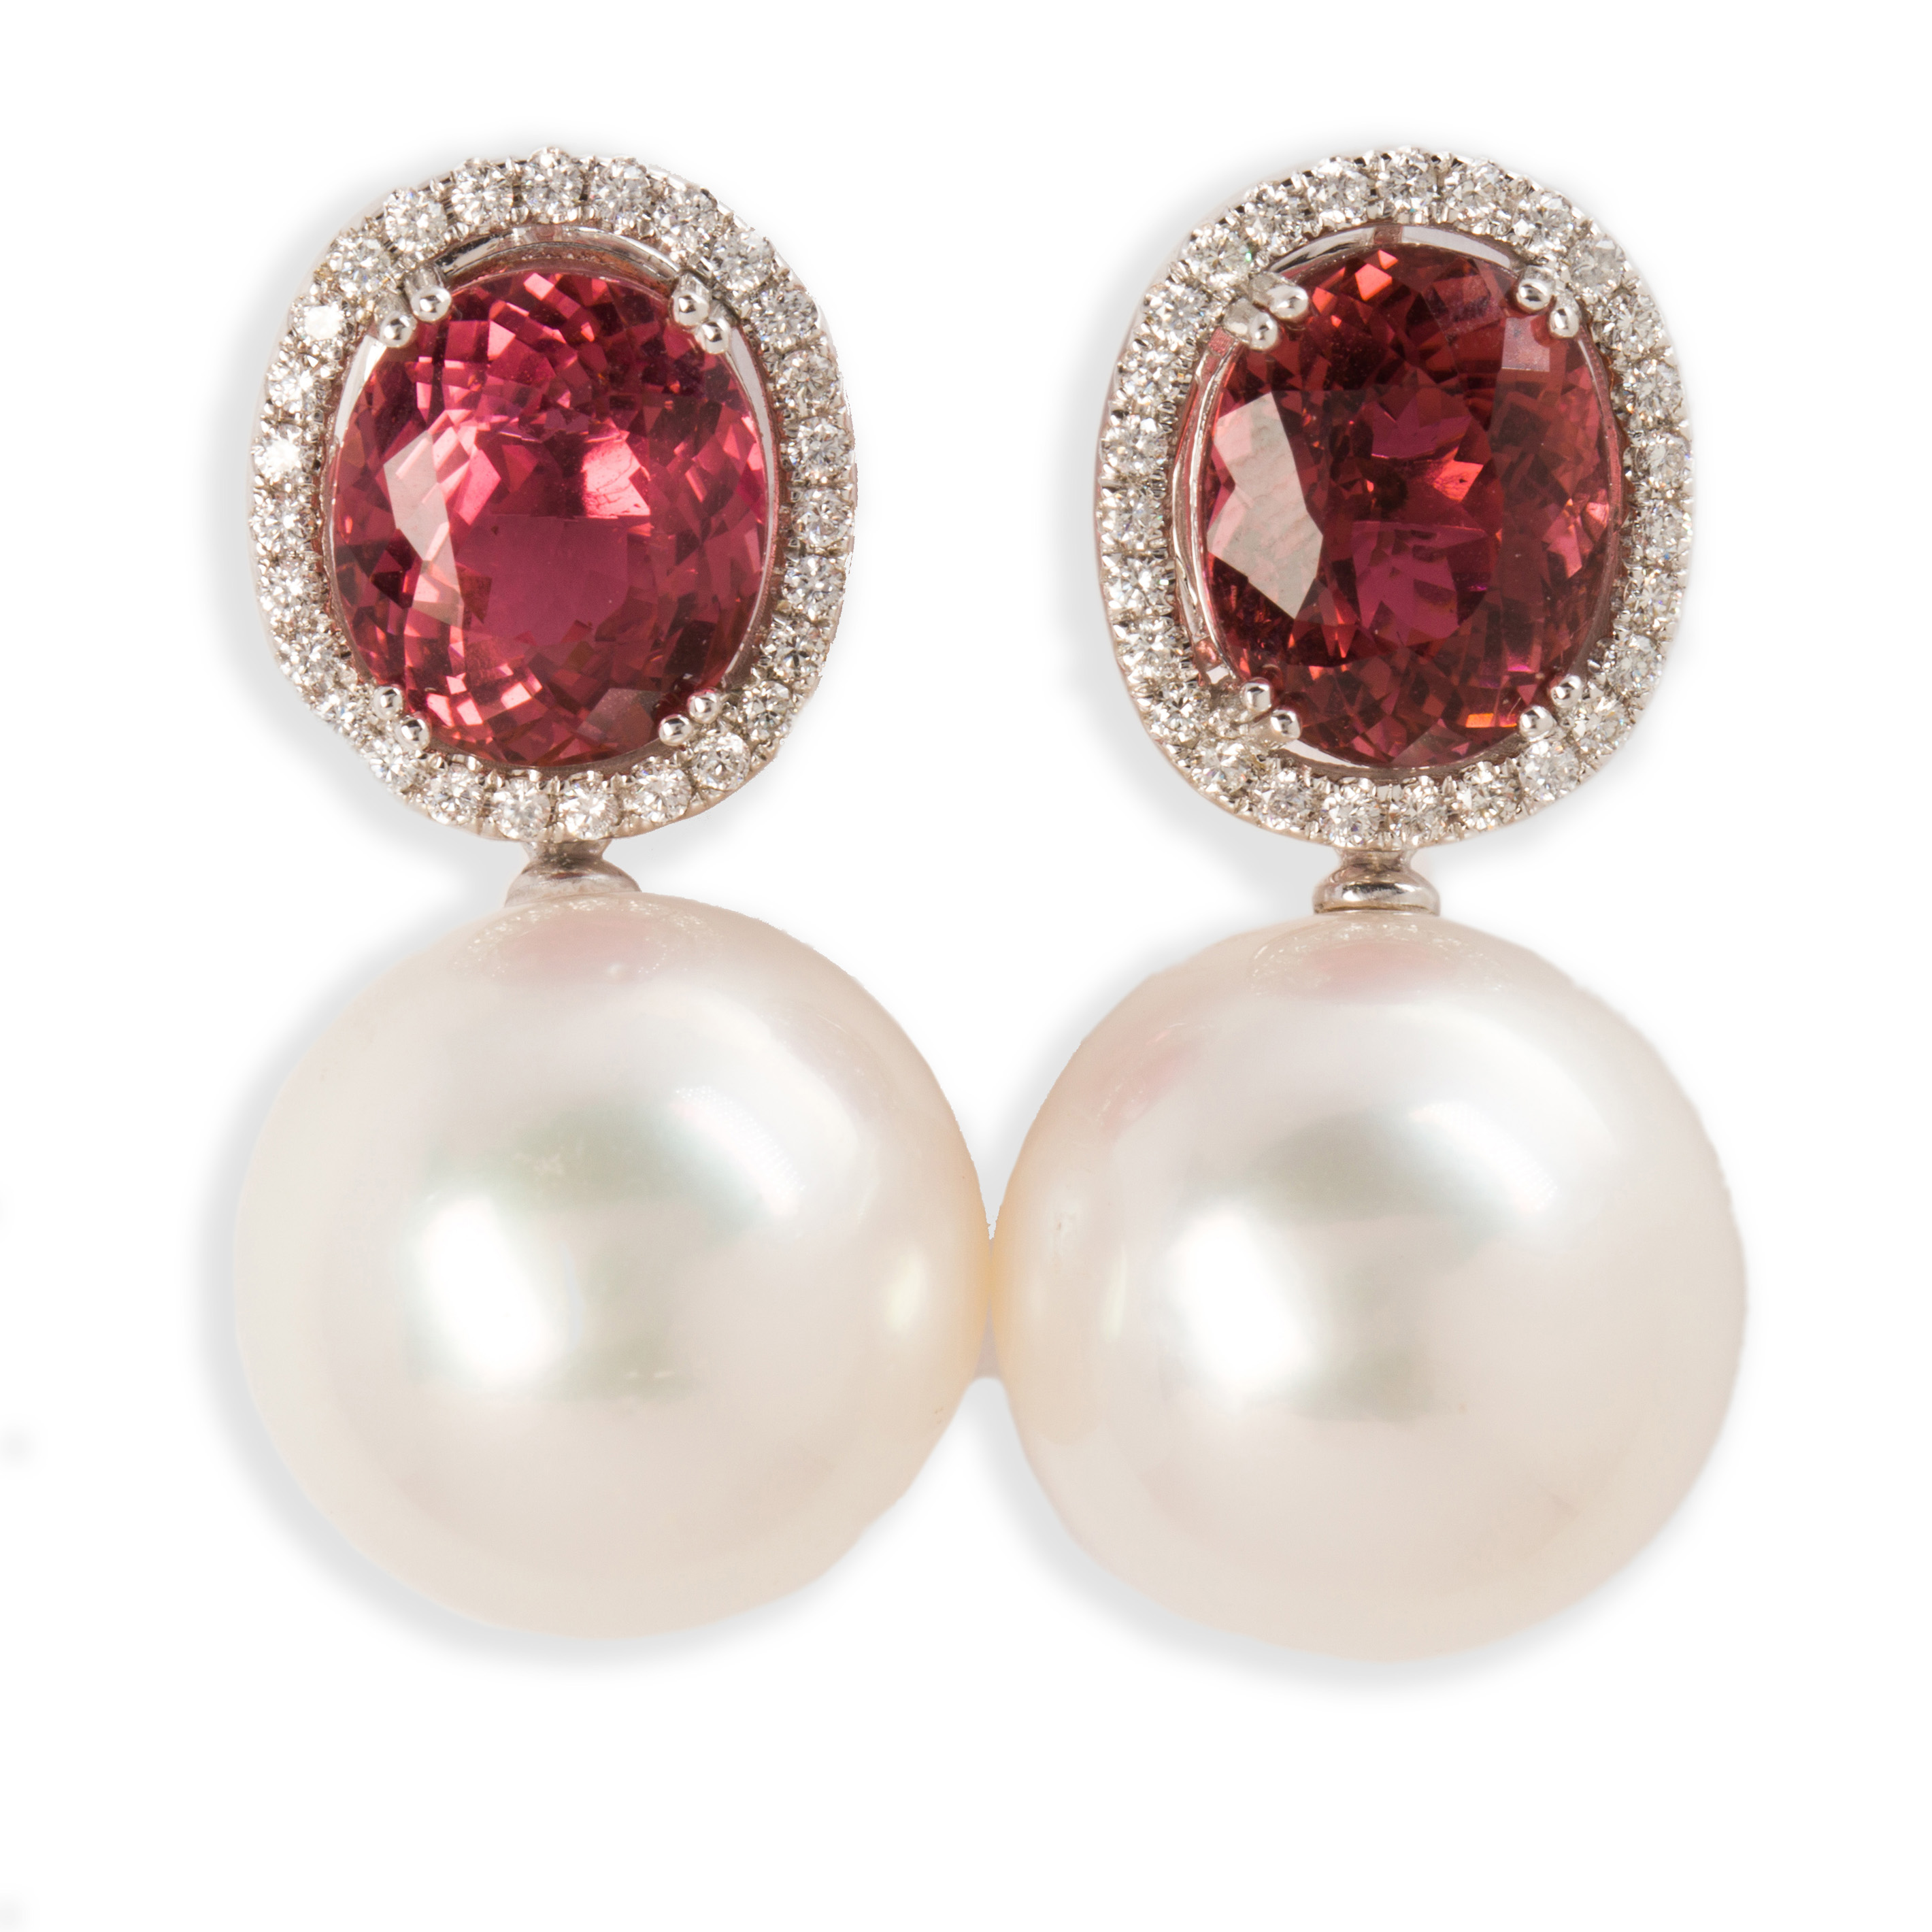 A PAIR OF SOUTH SEA PEARL AND PINK